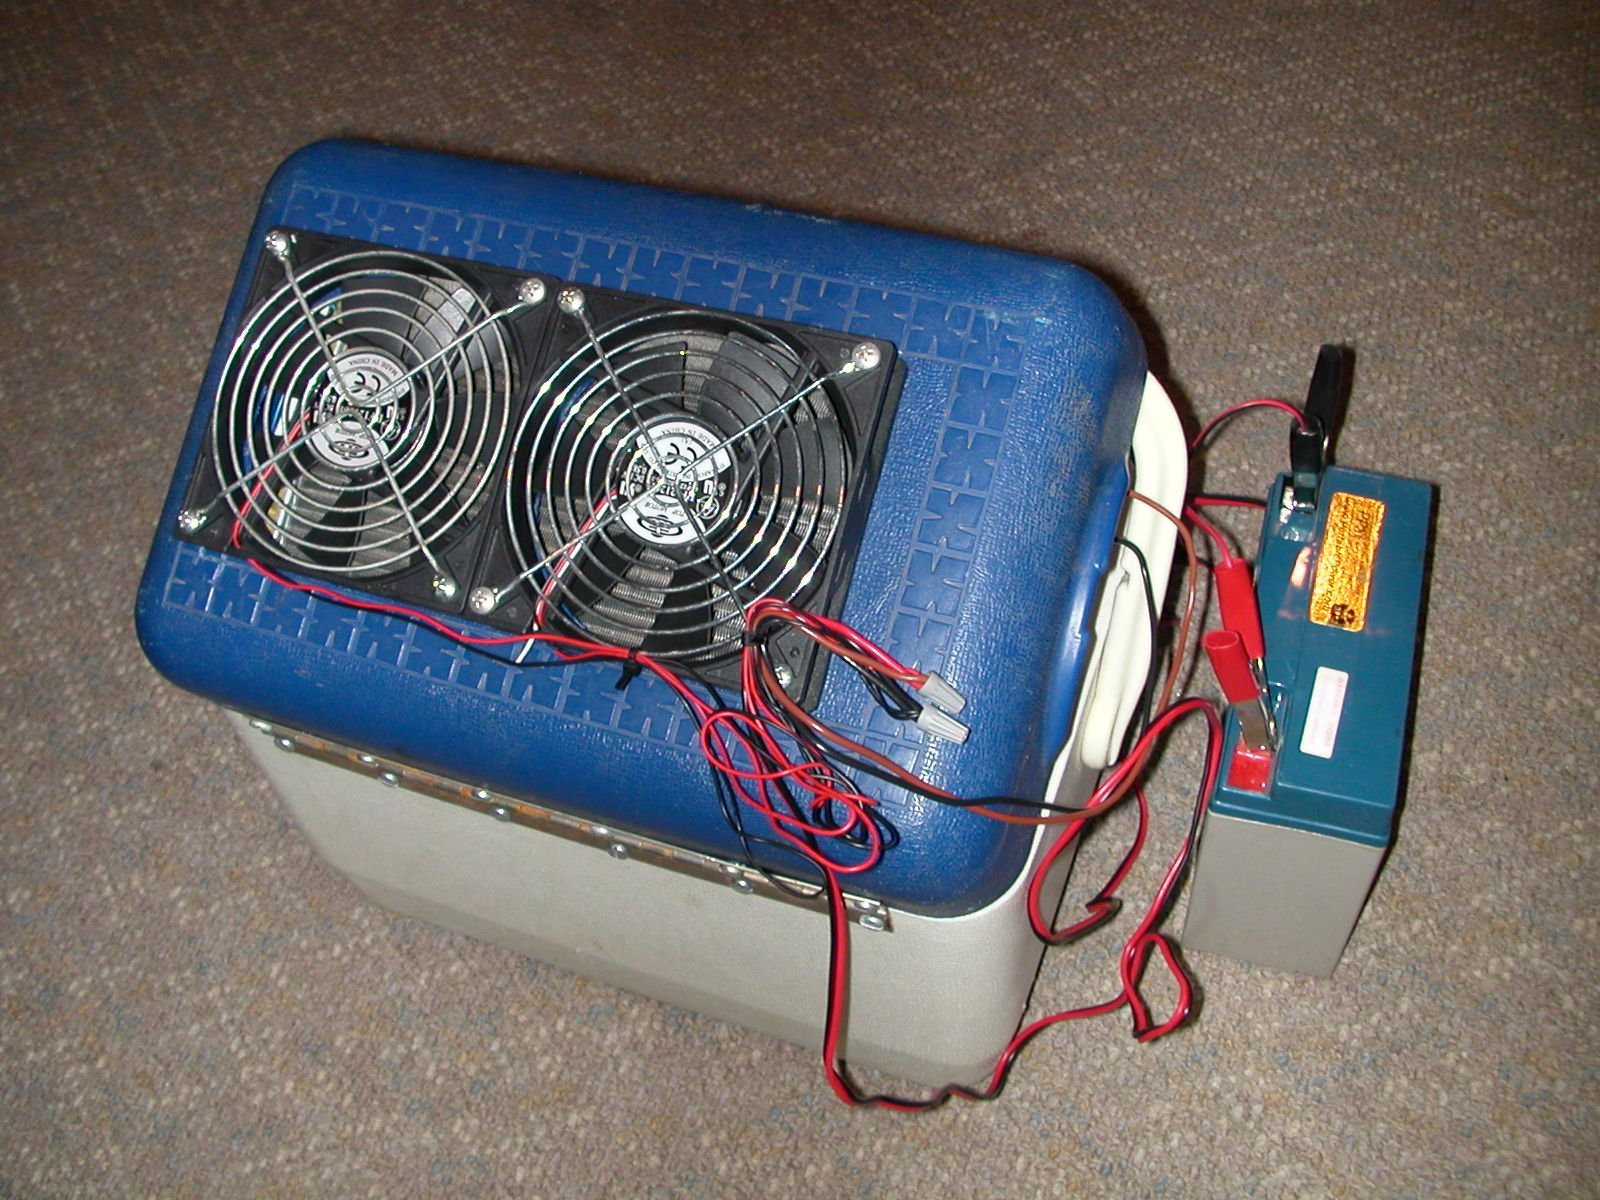 Diy Air Conditioner
 Portable 12V Air Conditioner Cheap and Easy 12 Steps